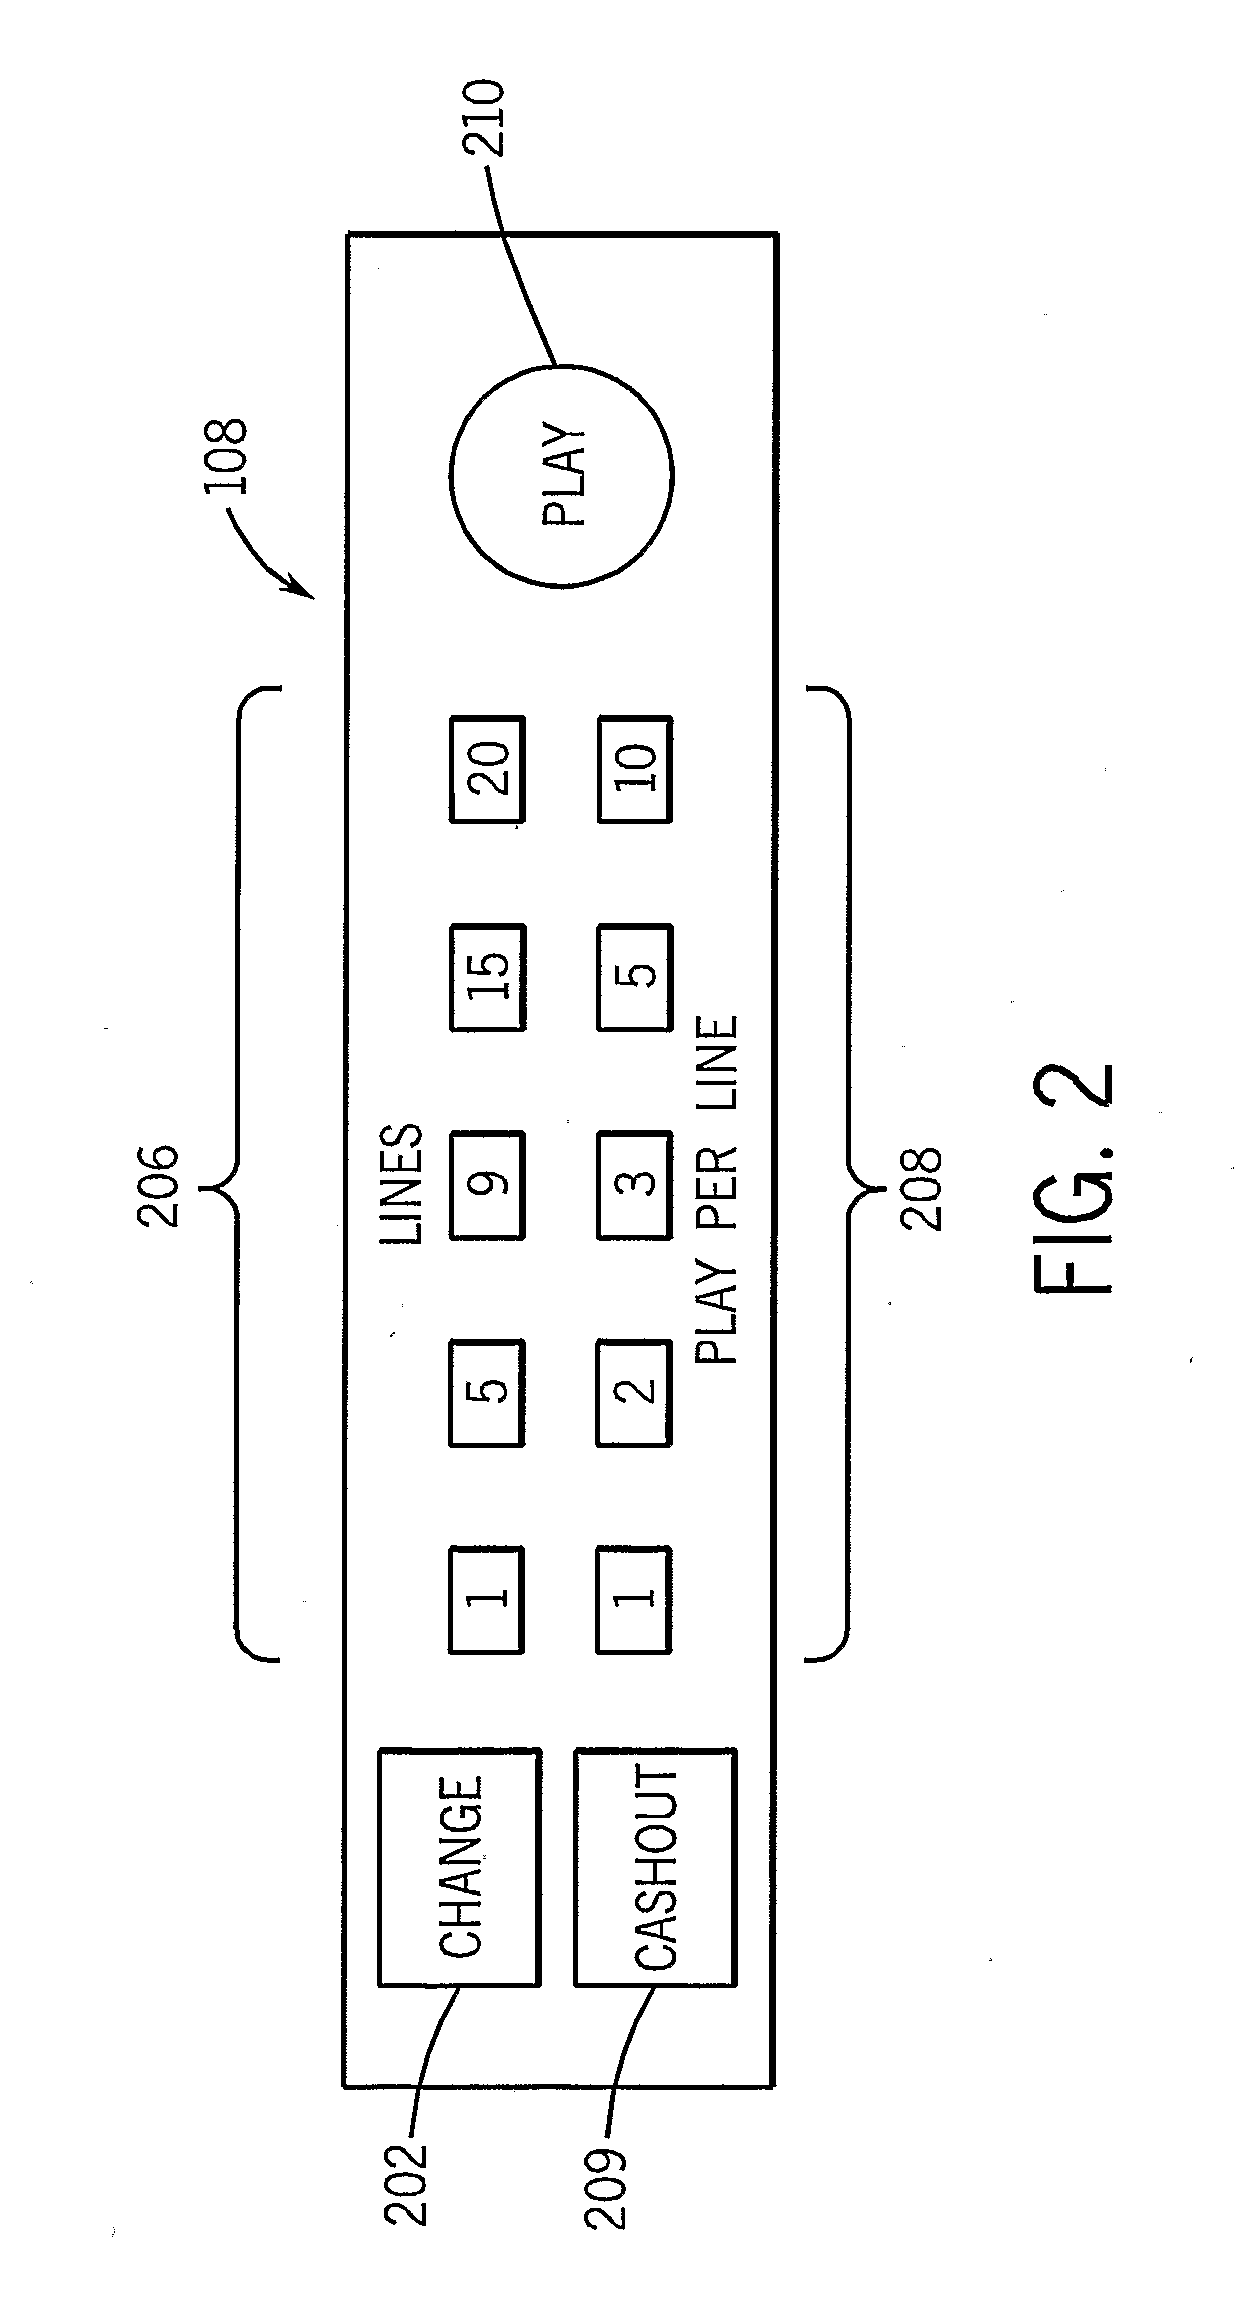 Dynamic user interface in a gaming system